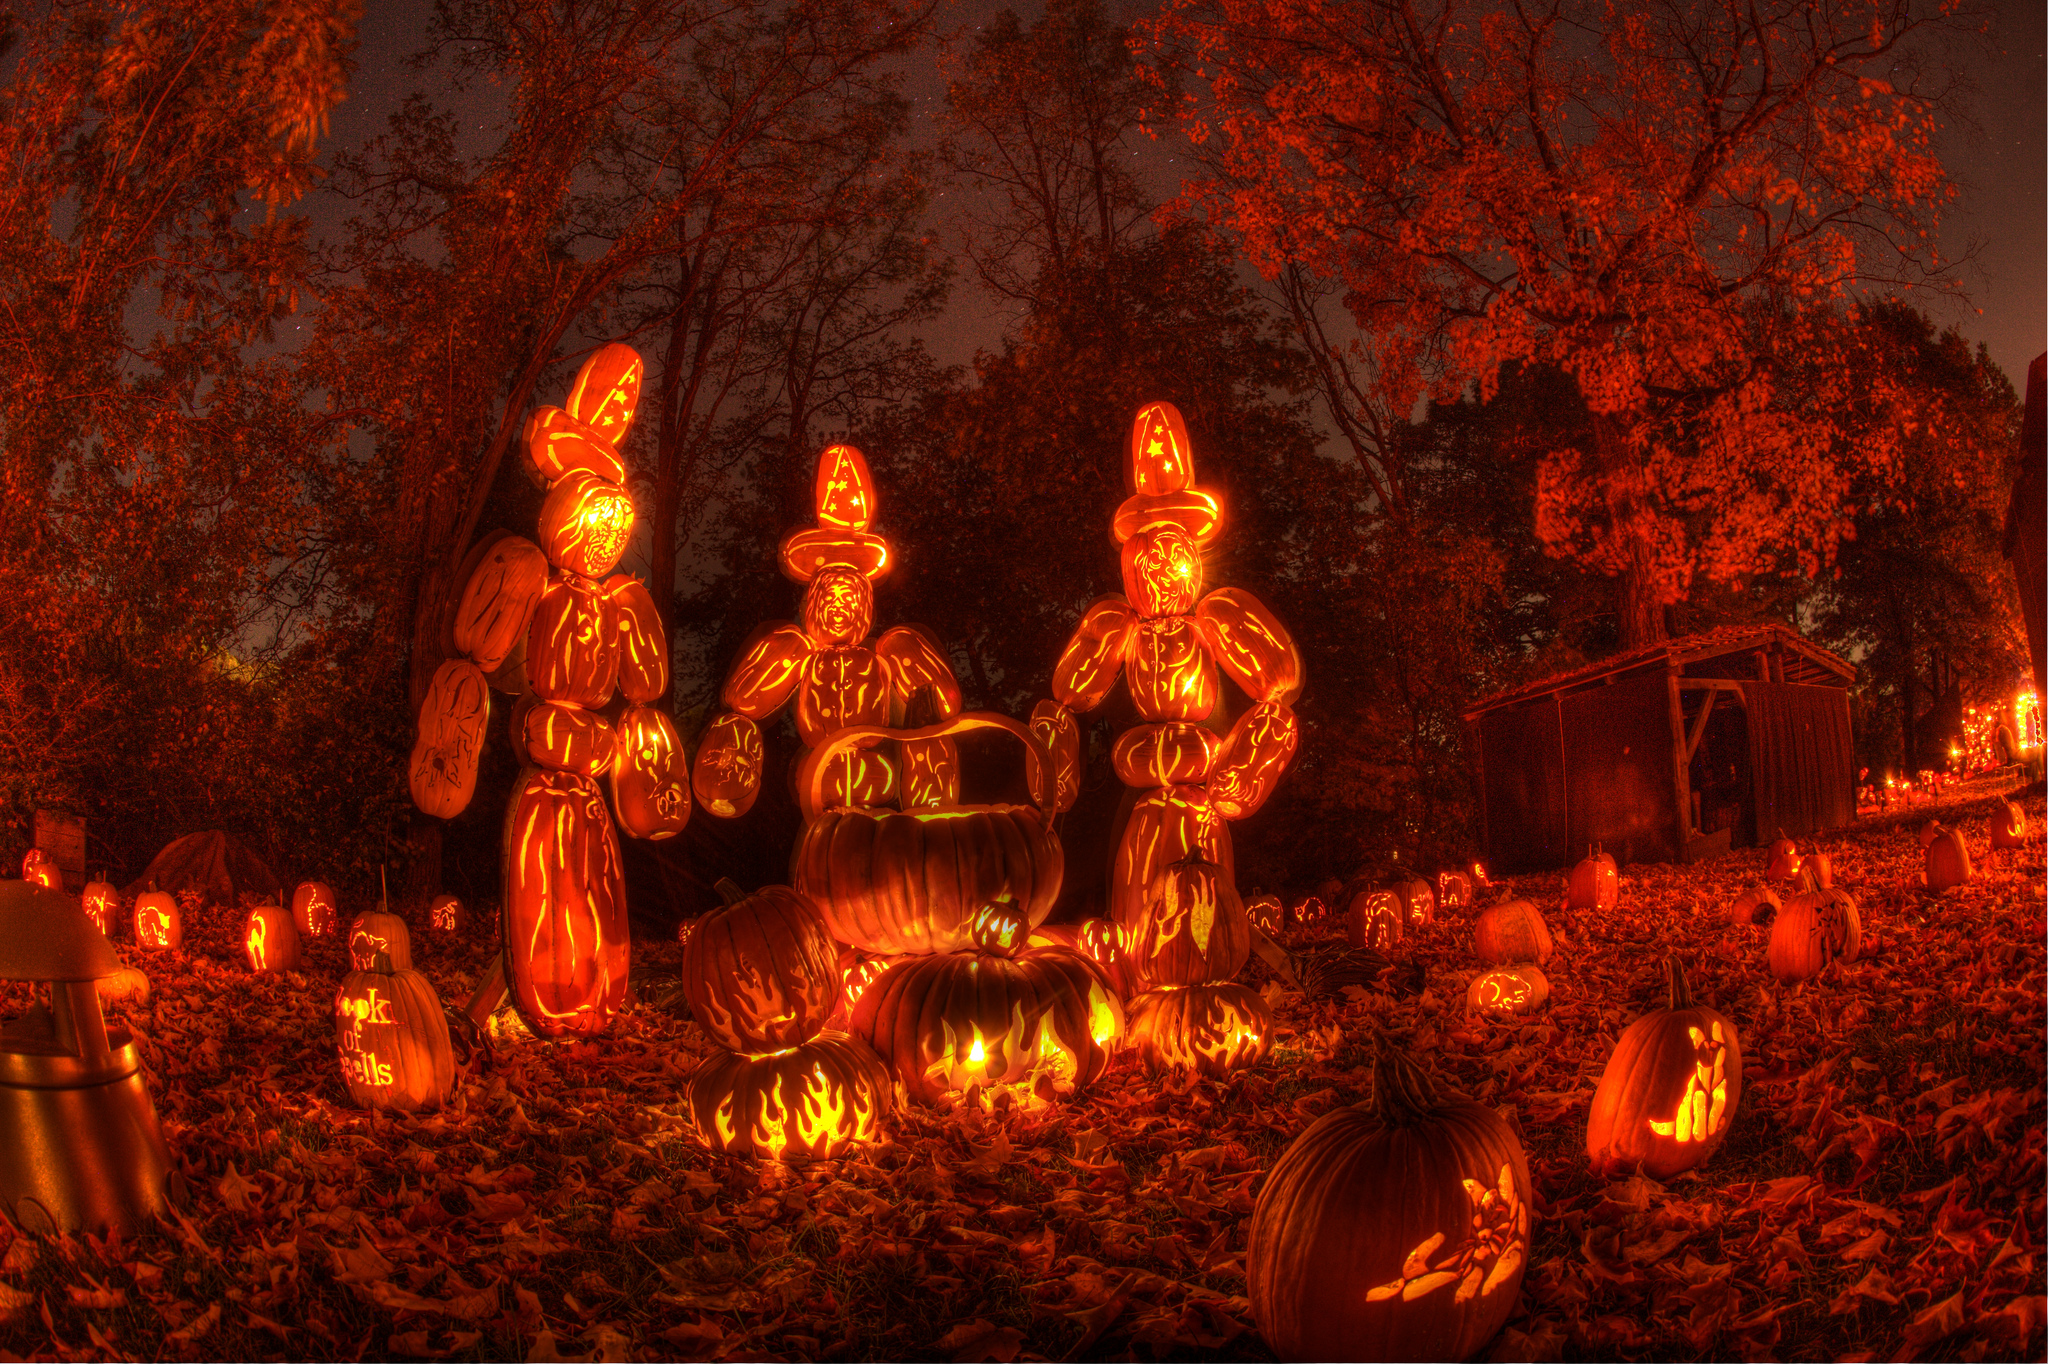 "Witches of the Great Jack-O-Lantern Blaze in Ossining New York." Credit: Anthony Quintano. https://goo.gl/vV7pY8